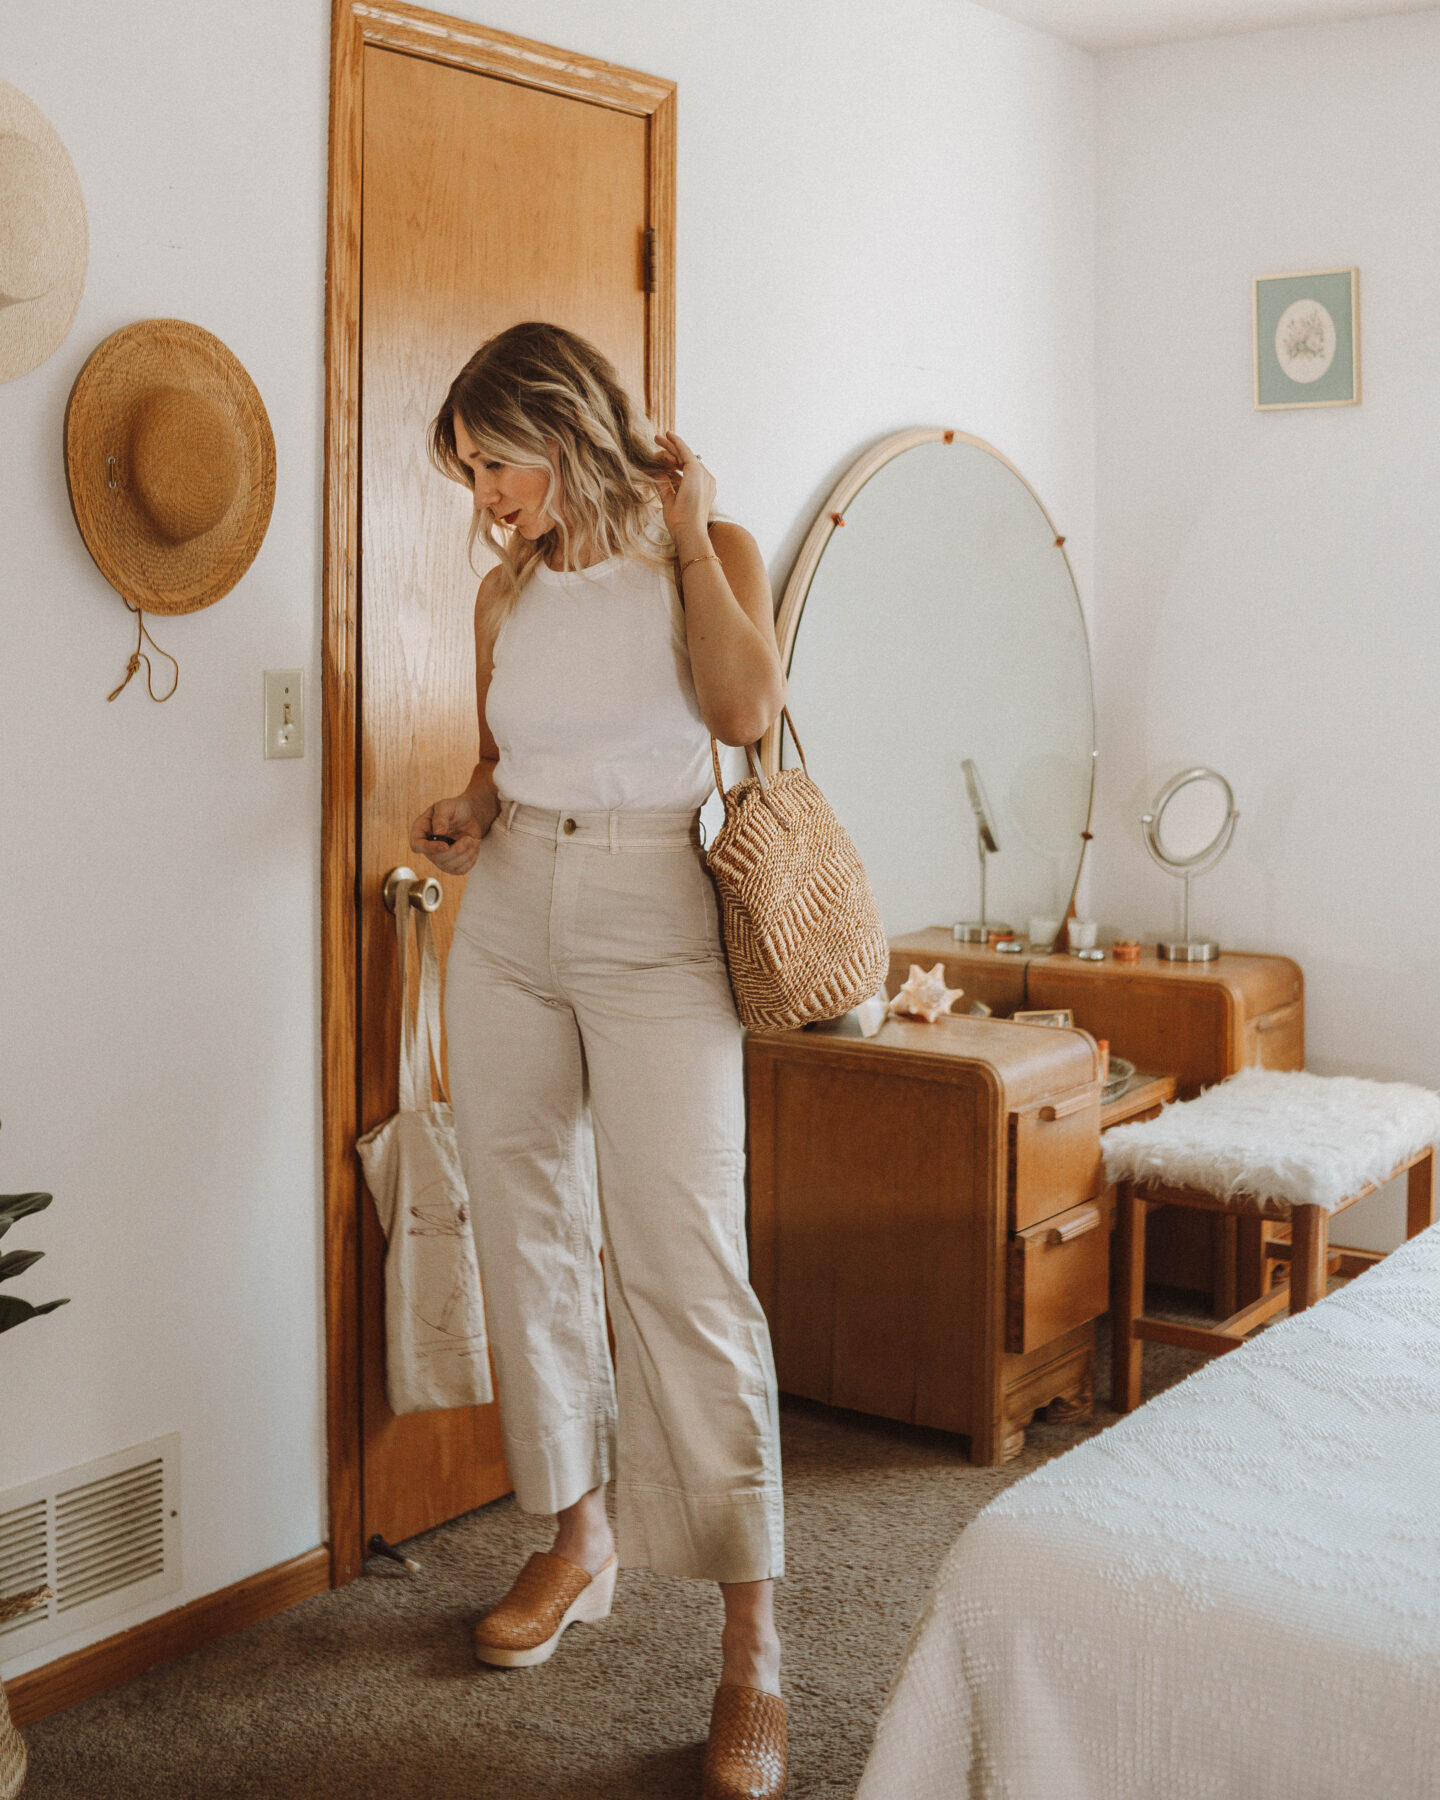 How to Style Wide Leg Pants + 6 Outfit Ideas, everlane lightweight wide leg crop chino, cut out tank, everlane woven clogs, vintage straw bag